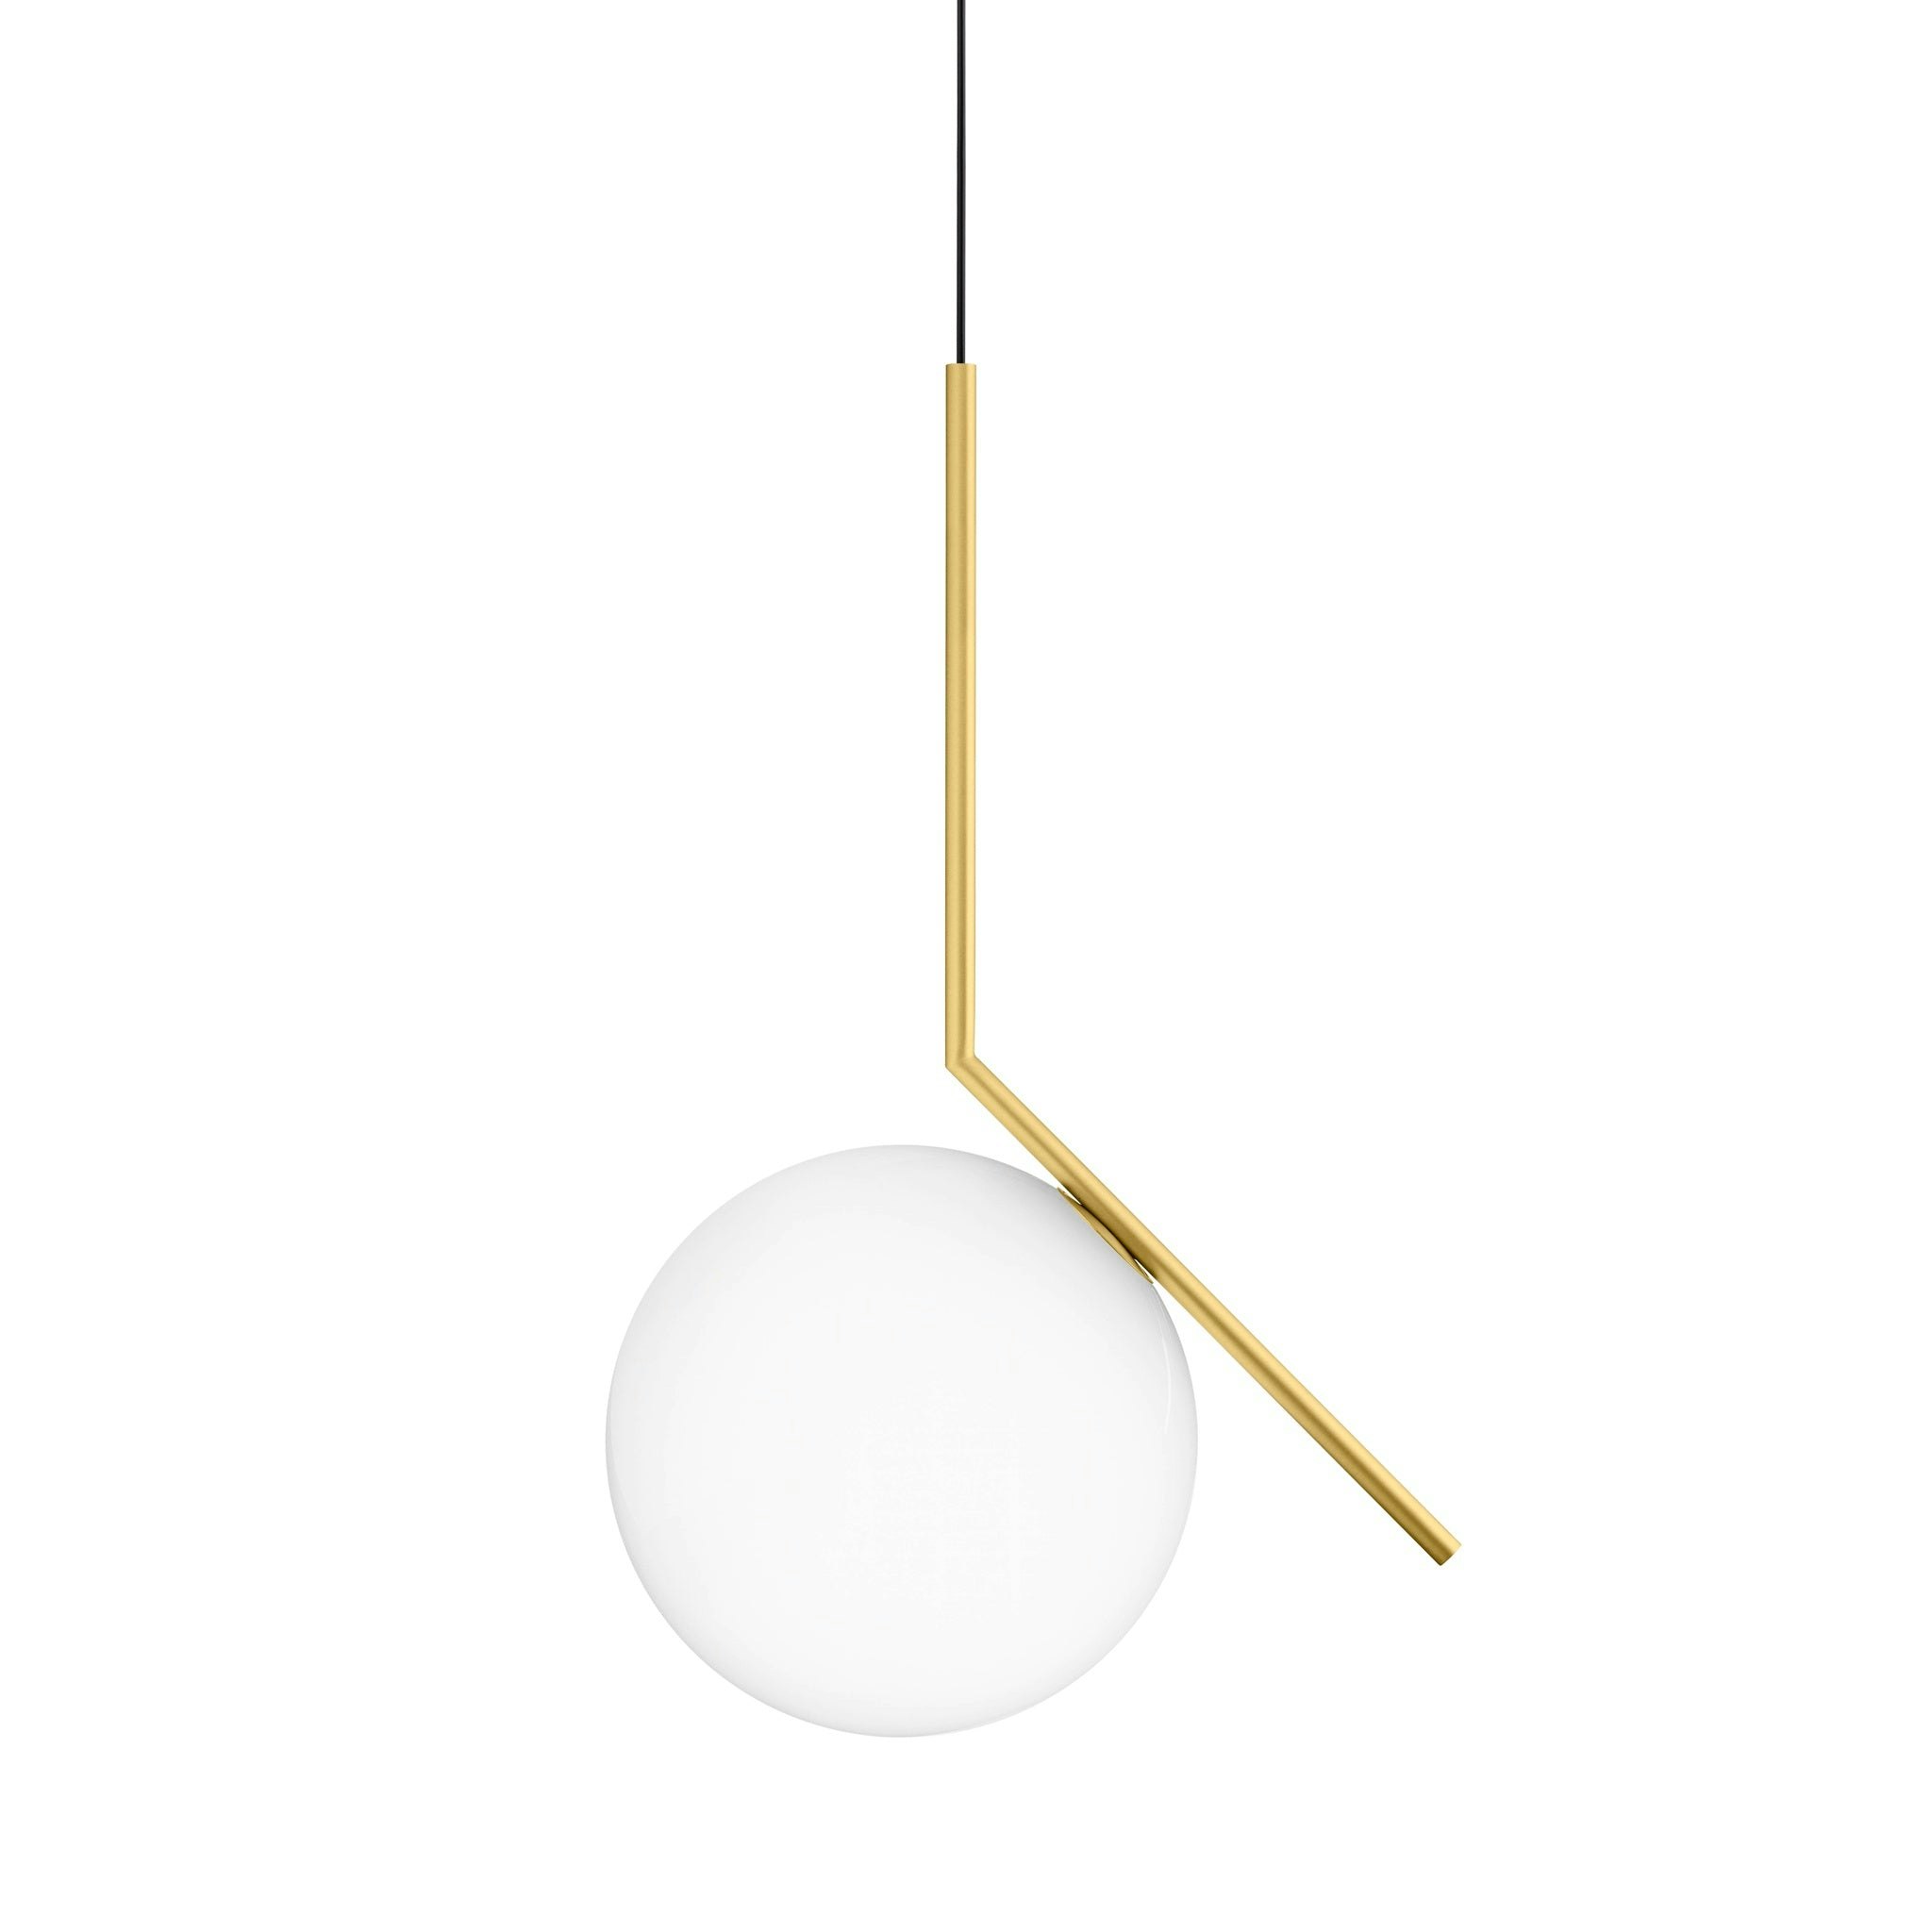 IC S2 light by Flos